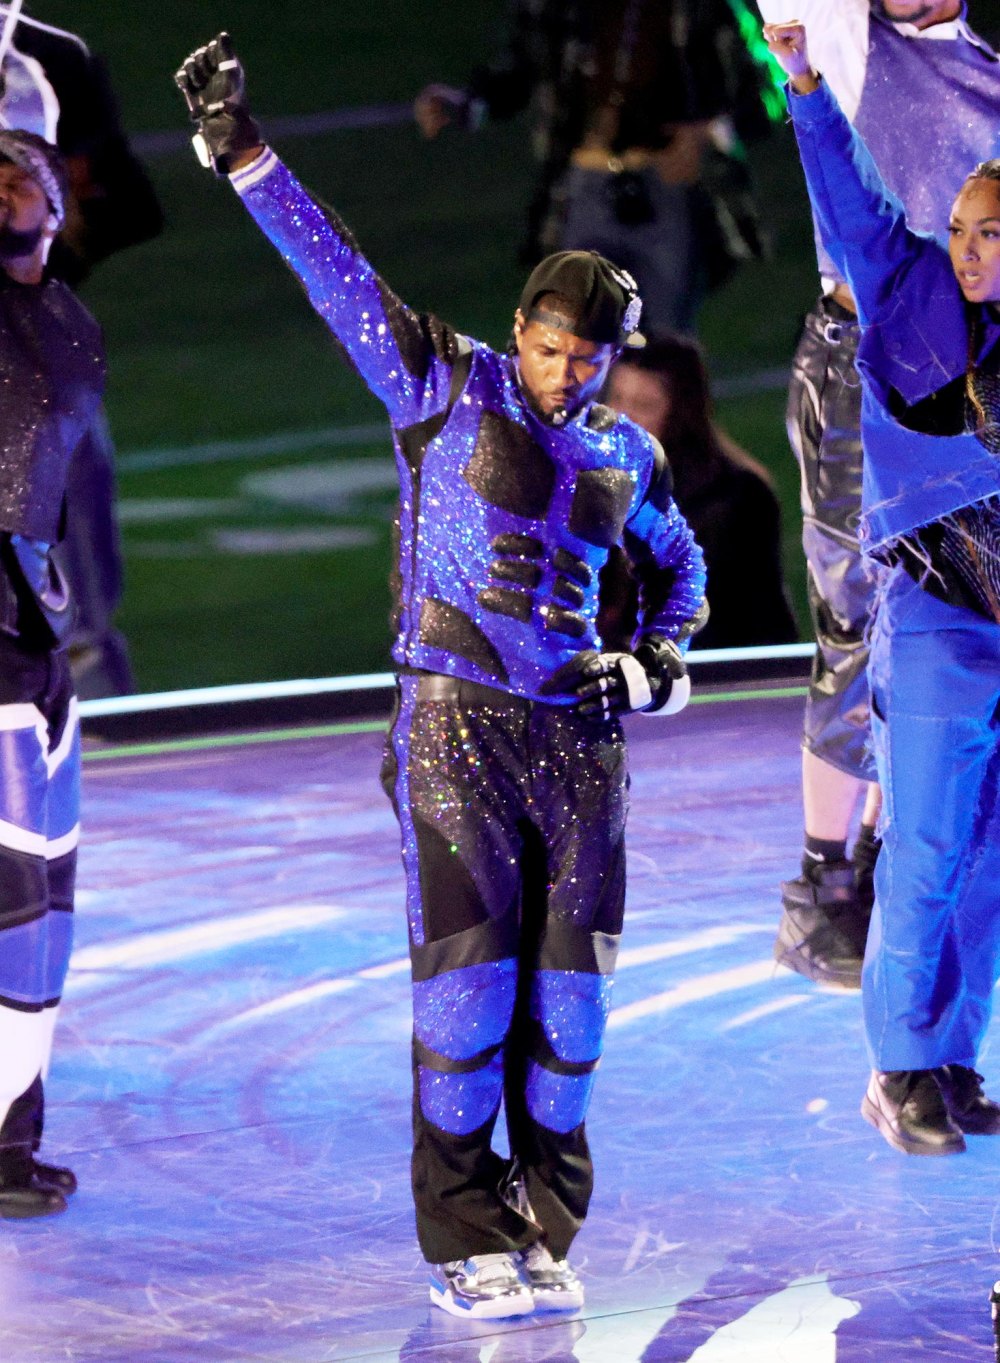 Usher Works With Off White to Design Bedazzled Blue and Black Roller Skating Look at the Super Bowl